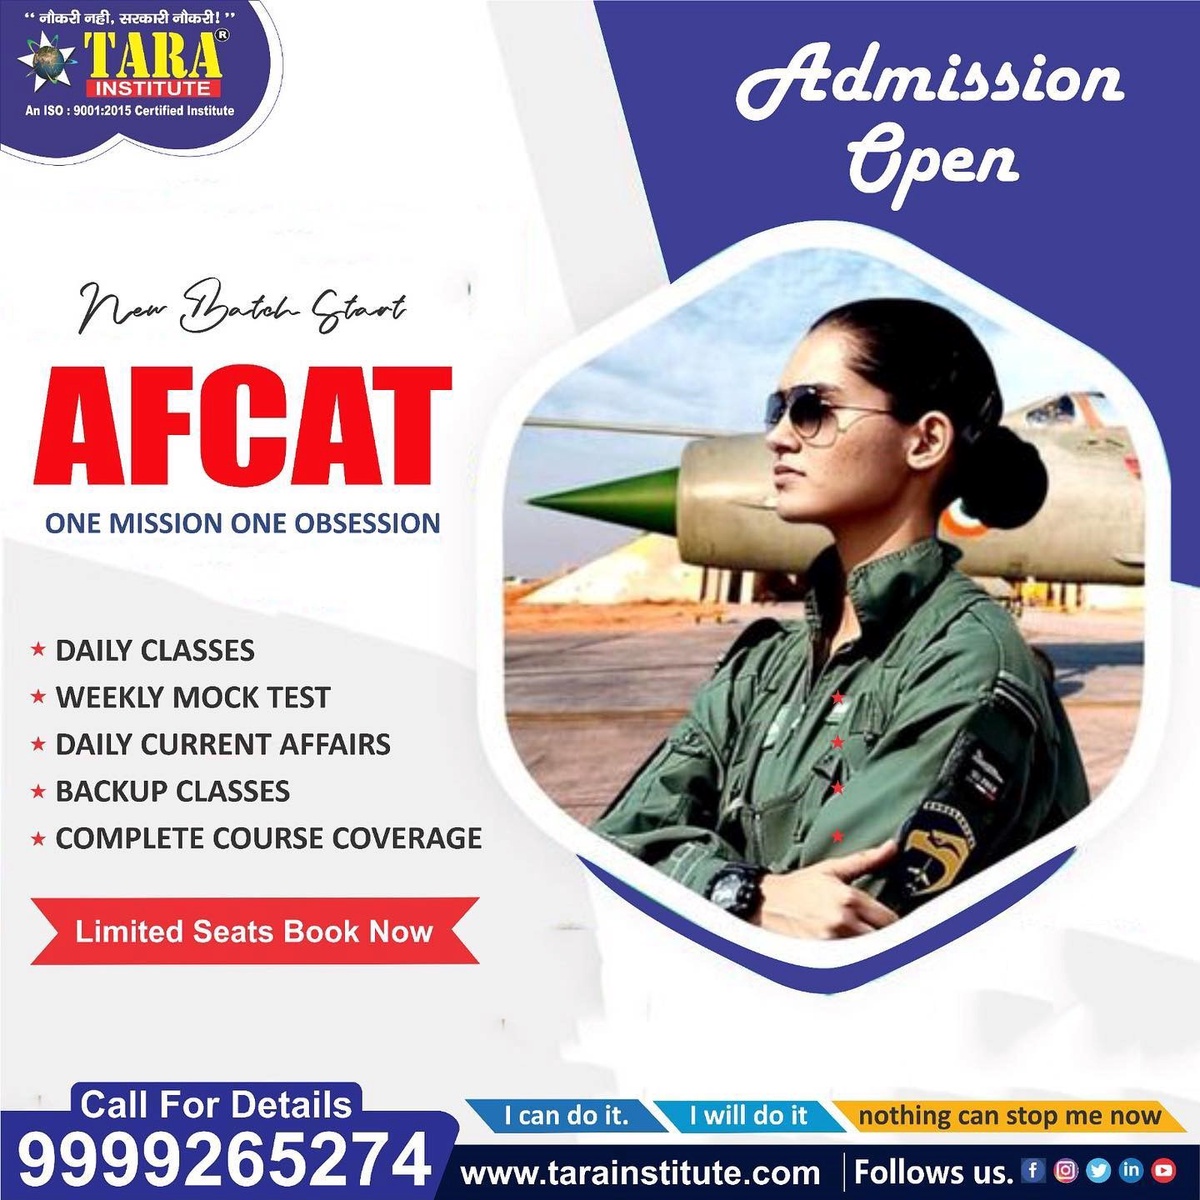 Common Mistakes To Be Avoided While Preparing for AFCAT Exam